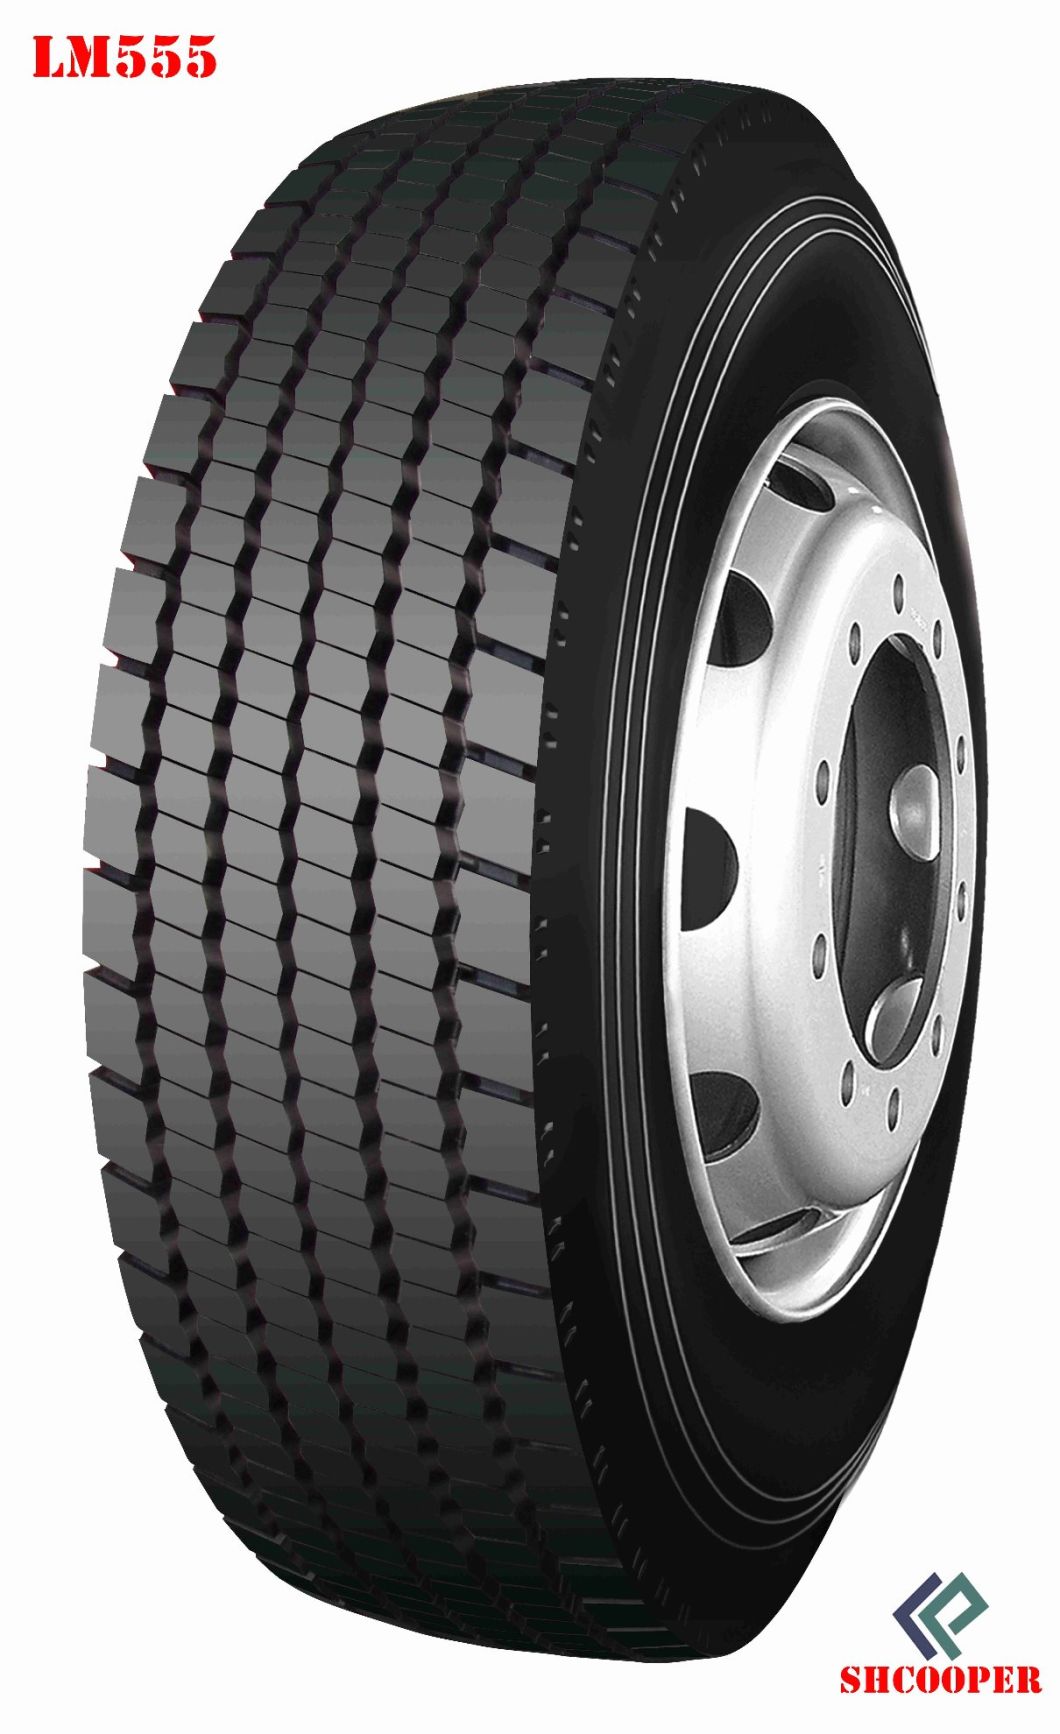 Heavy Truck Tyre / Tubeless Rubber Tyres / Trailer Tyre 555